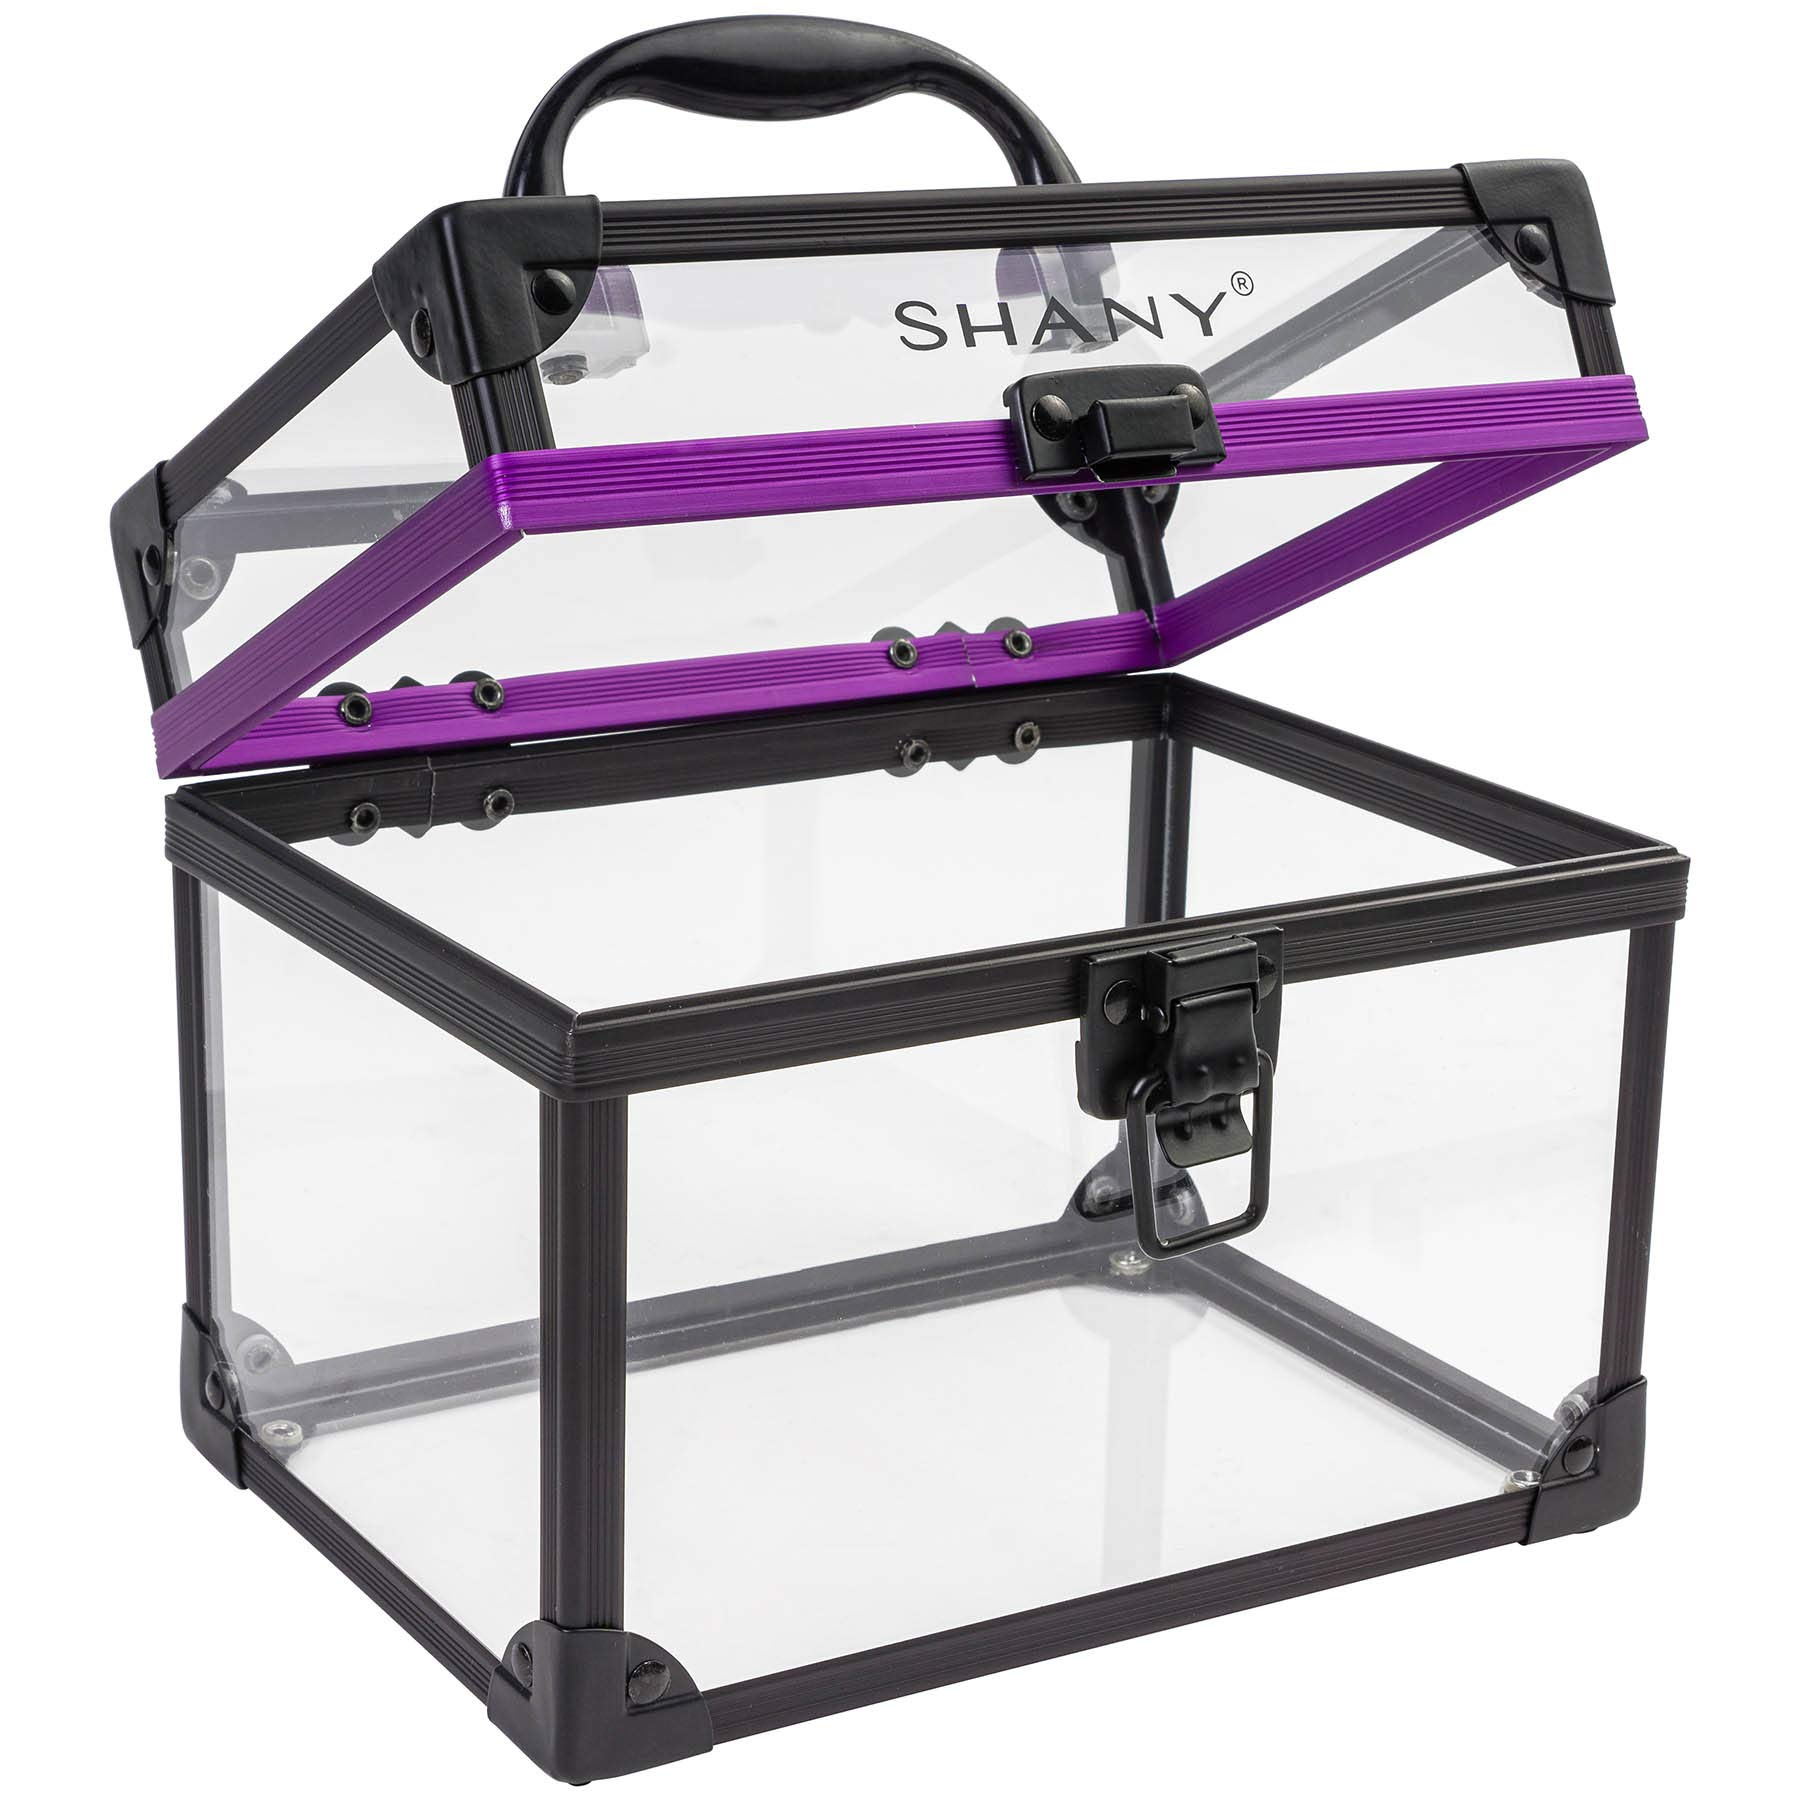 SHANY Clear Cosmetics and Toiletry Train Case - Large-Sized Travel Makeup Organizer with Secure Closure and Black/Purple Accents